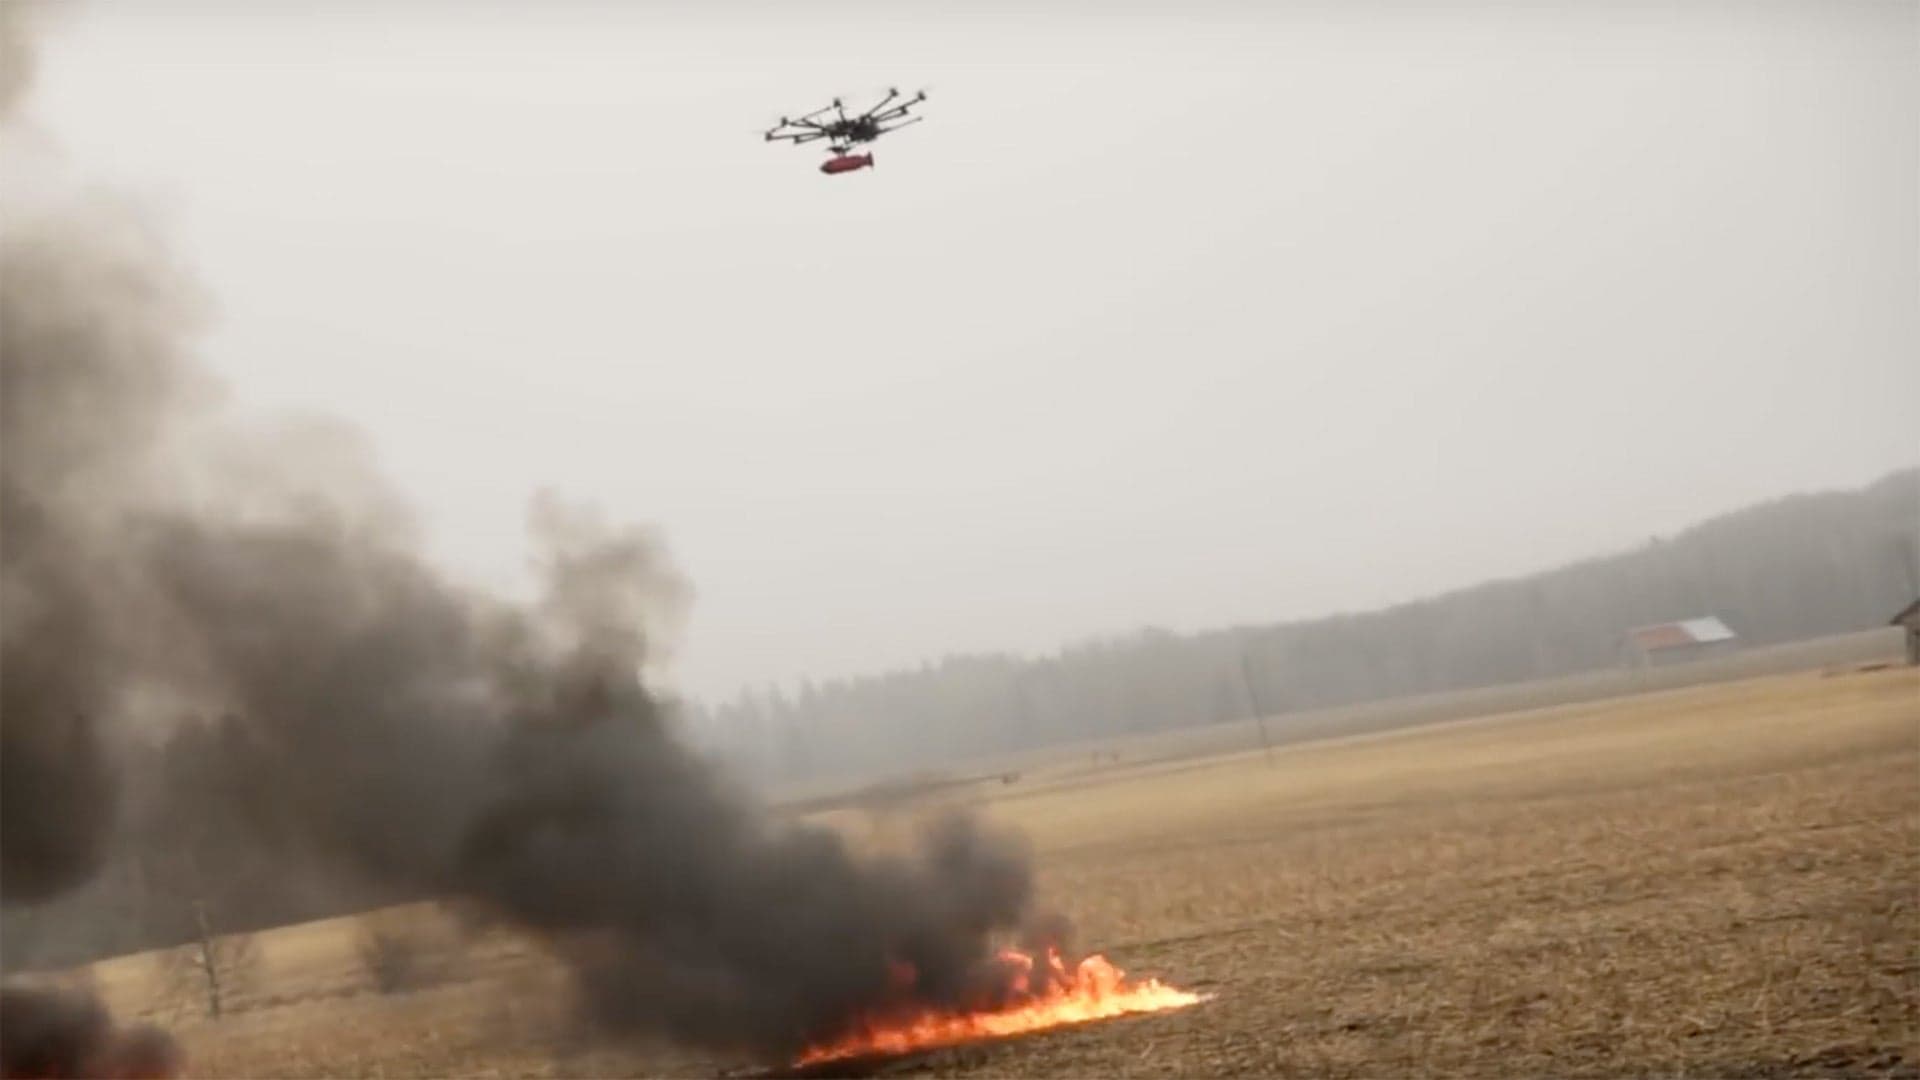 YouTubers Create Drone That Fights Fires With Explosives